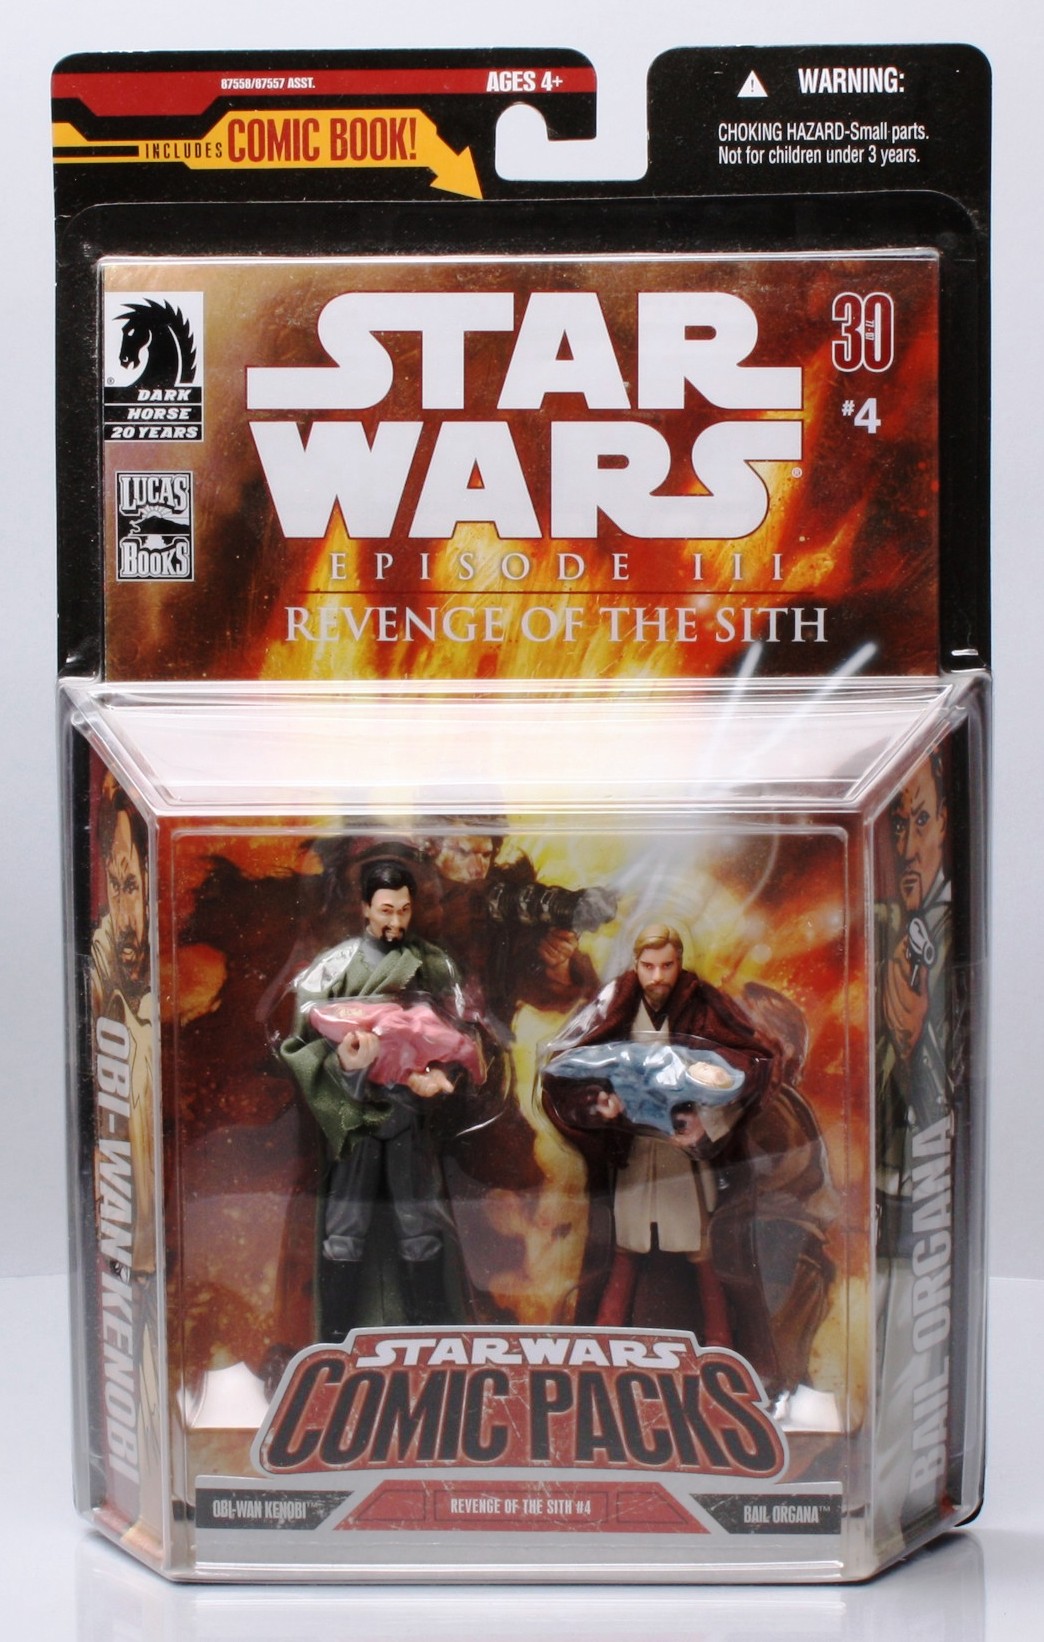 Hasbro Star Wars Attack of The Clones 2003 Action Figure Bail Organa 33 RARE USA for sale online 